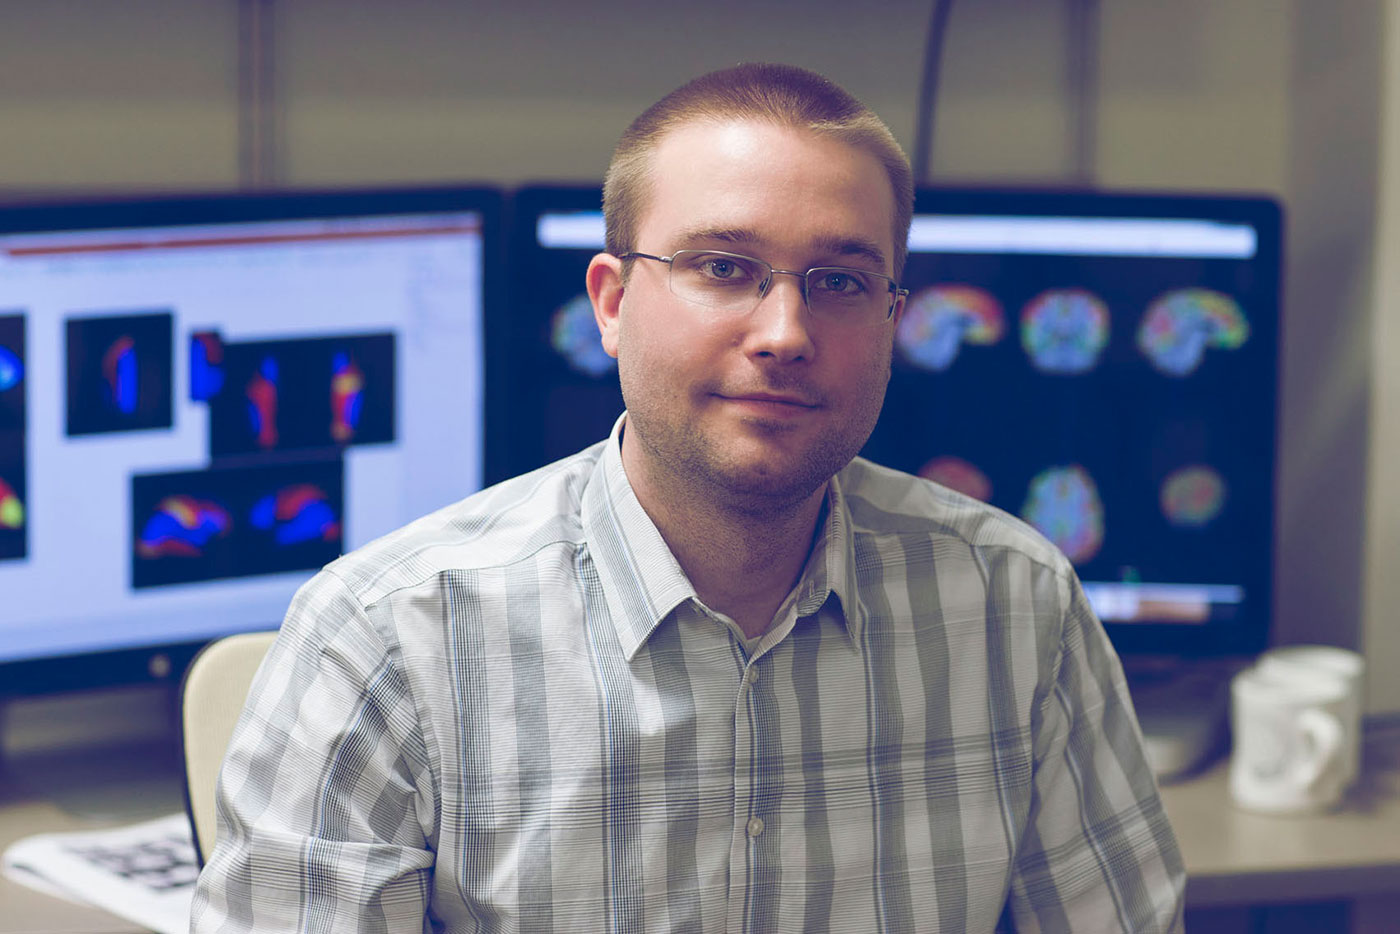 Using fMRI, neuroscience graduate student Bryson Reynolds is studying subconcussions experienced by college football players.